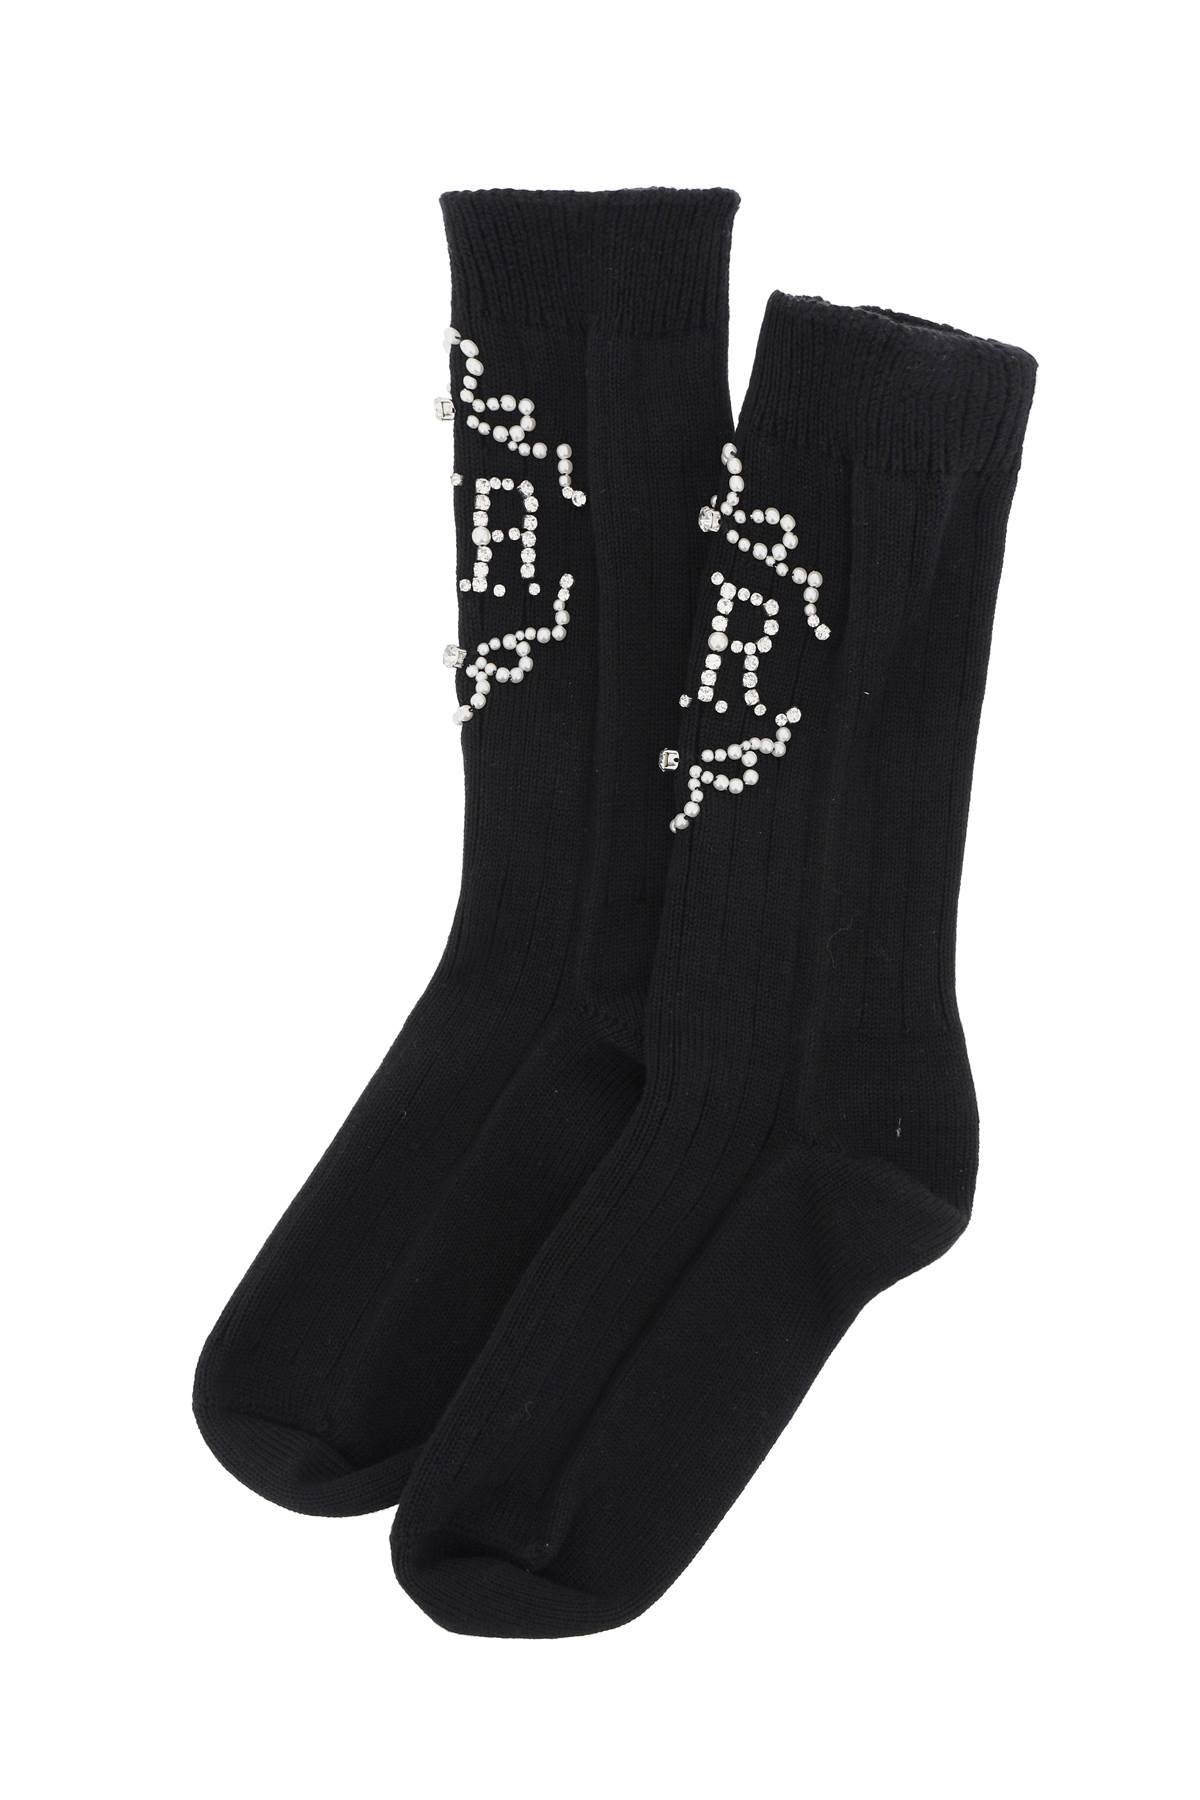 Simone Rocha Sr Socks With Pearls And Crystals Women